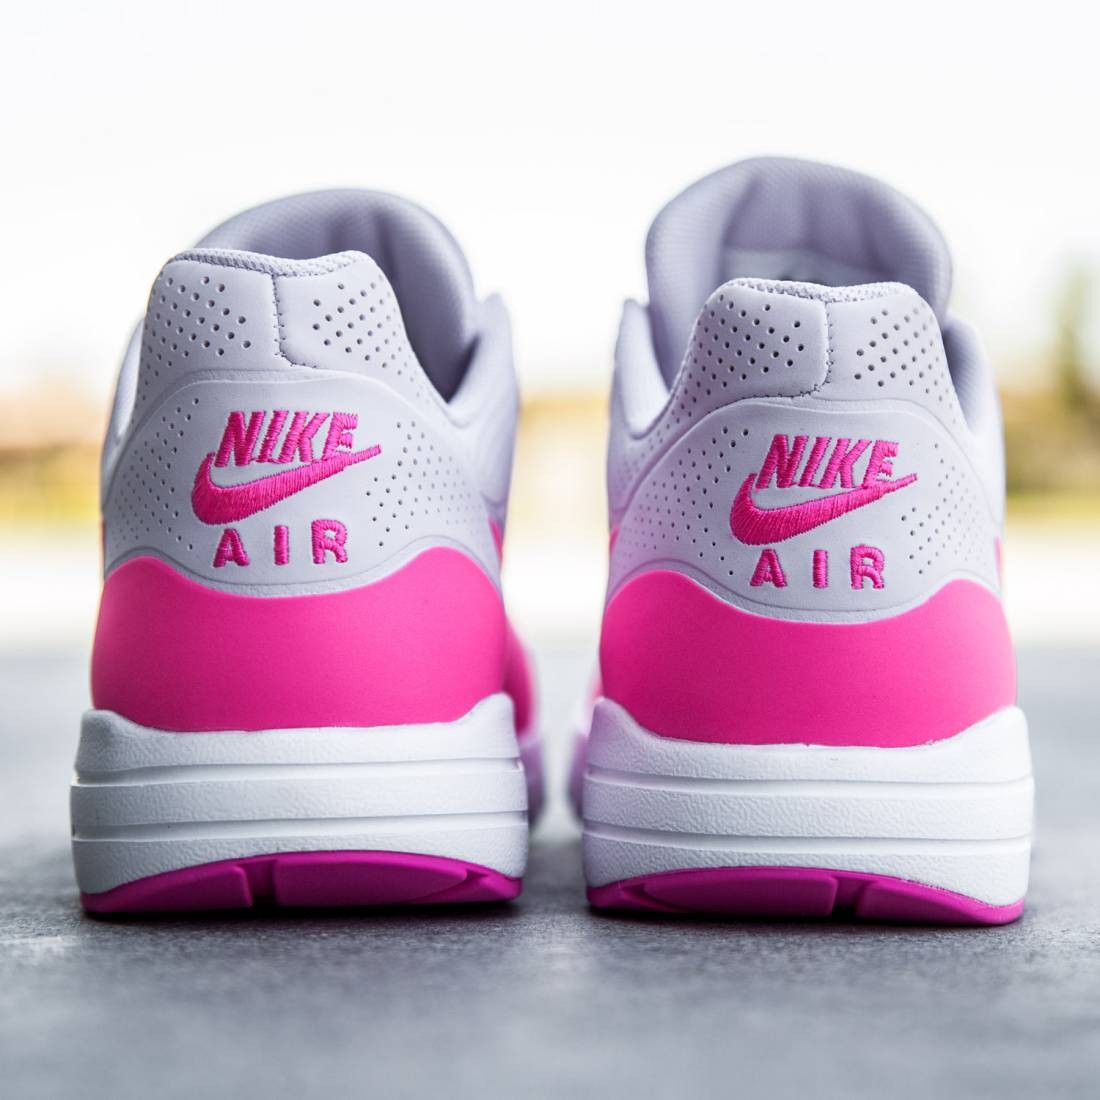 mager In detail Taiko buik Nike Women Air Max 1 Ultra Moire (bleached lilac / white / pink blast)